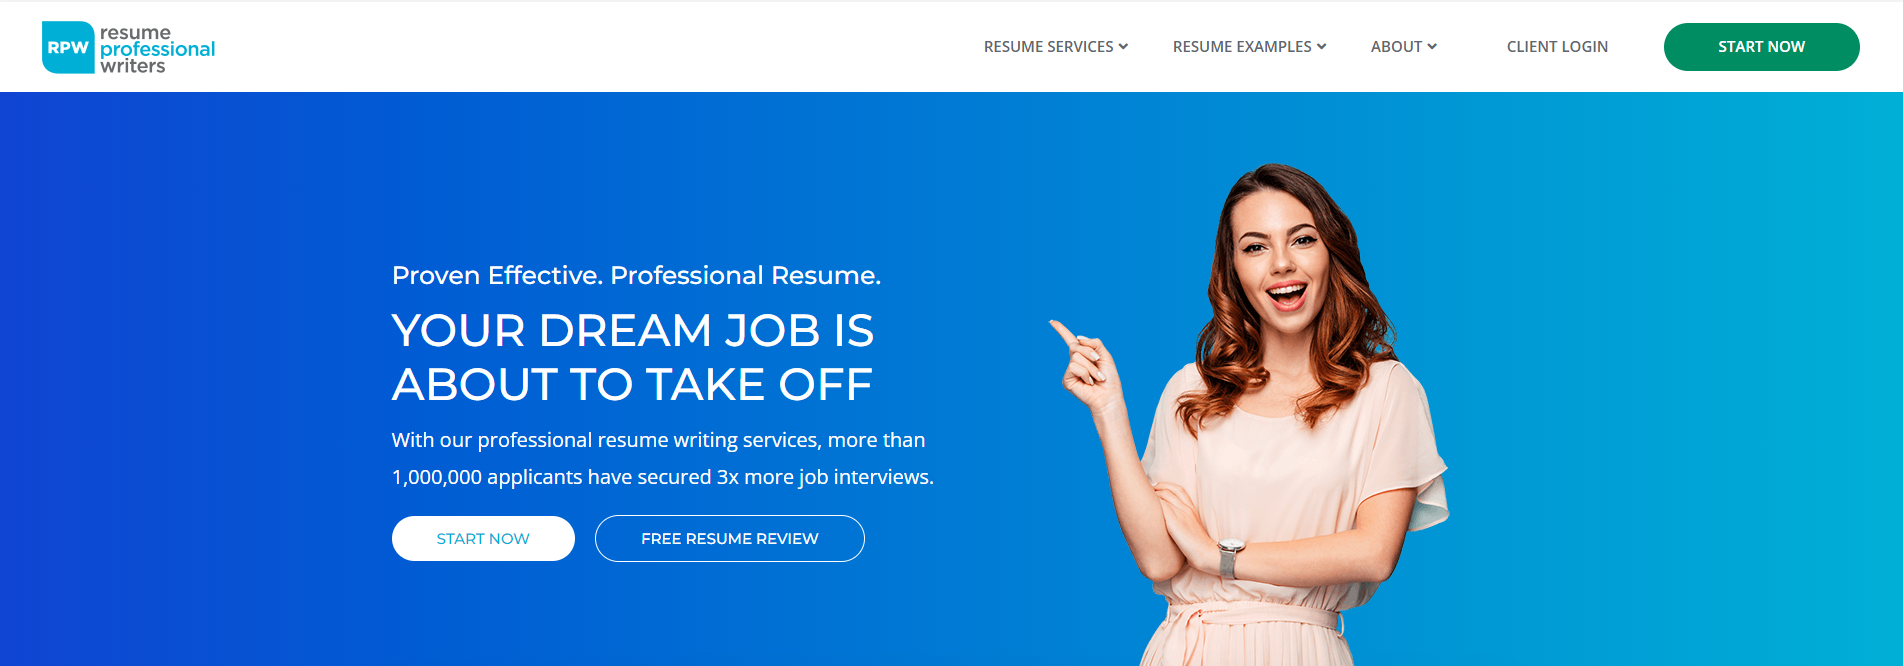 Resume Professional Writers Hero Section Best Engineering Resume Writing Services